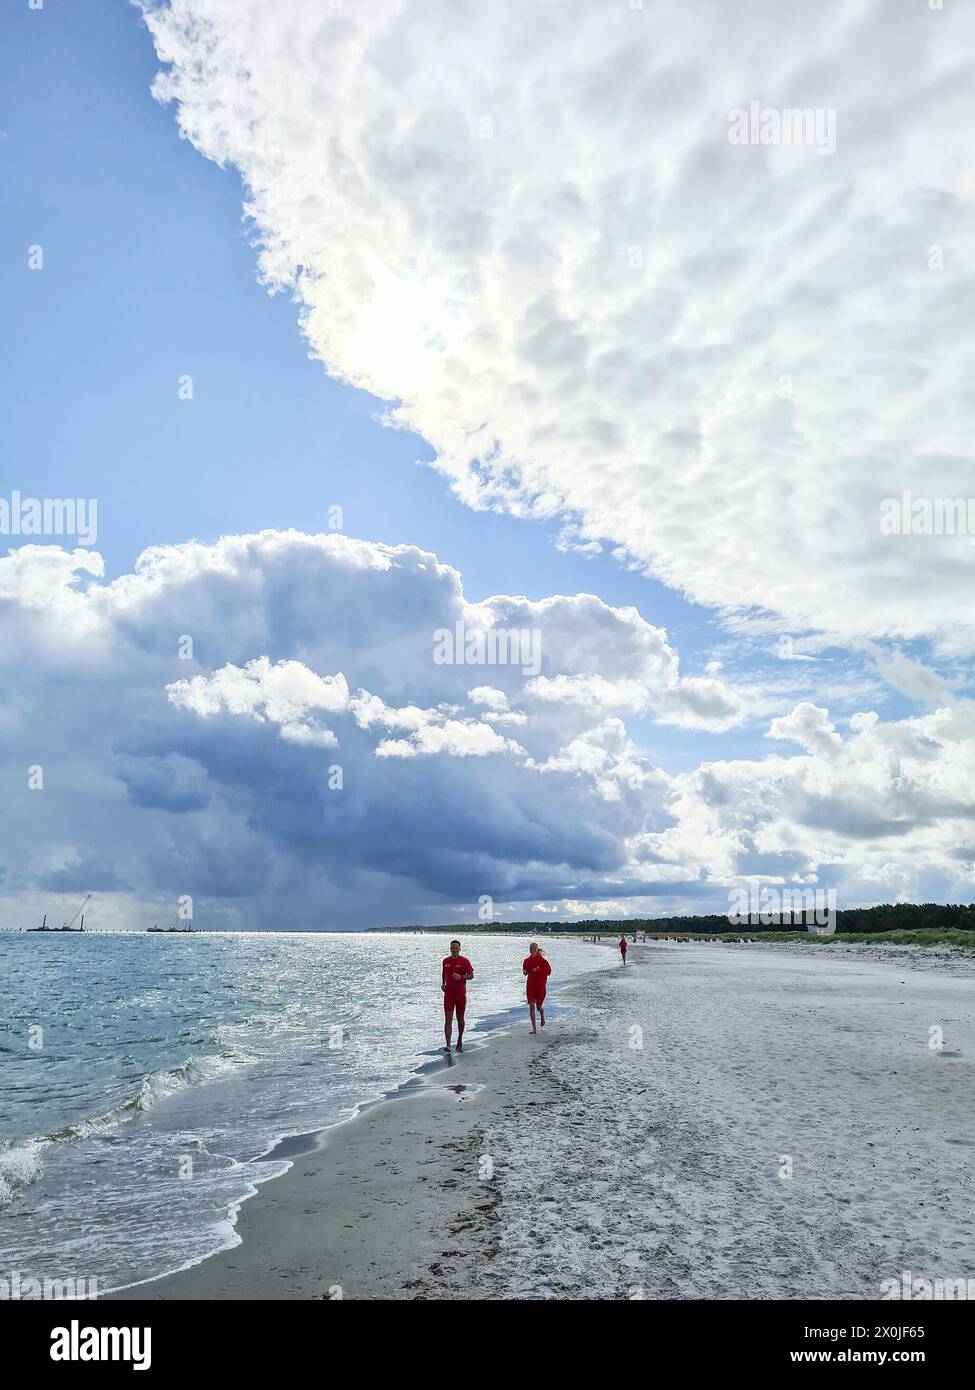 Two people walking along the water's edge on the beach in Prerow, Mecklenburg-Vorpommern, Germany Stock Photo